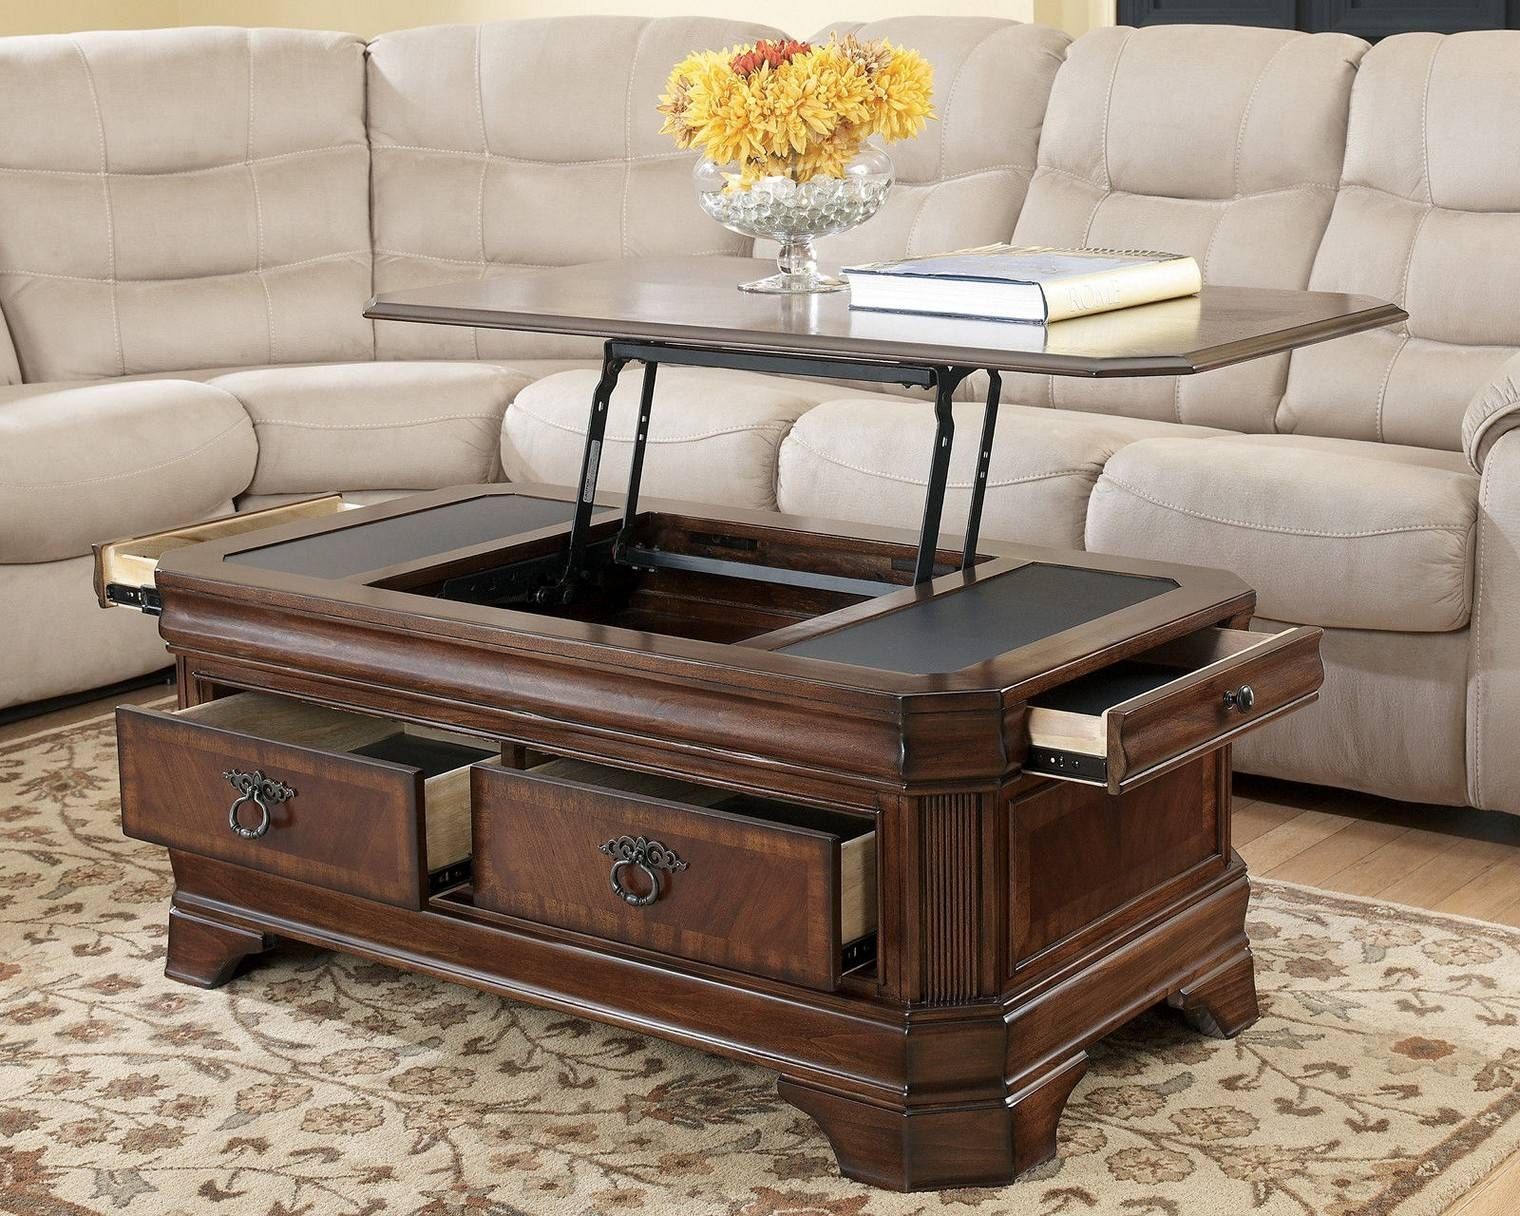 Cool Coffee Tables For Guys Rooms Inside Cool Coffee Tables (View 4 of 15)